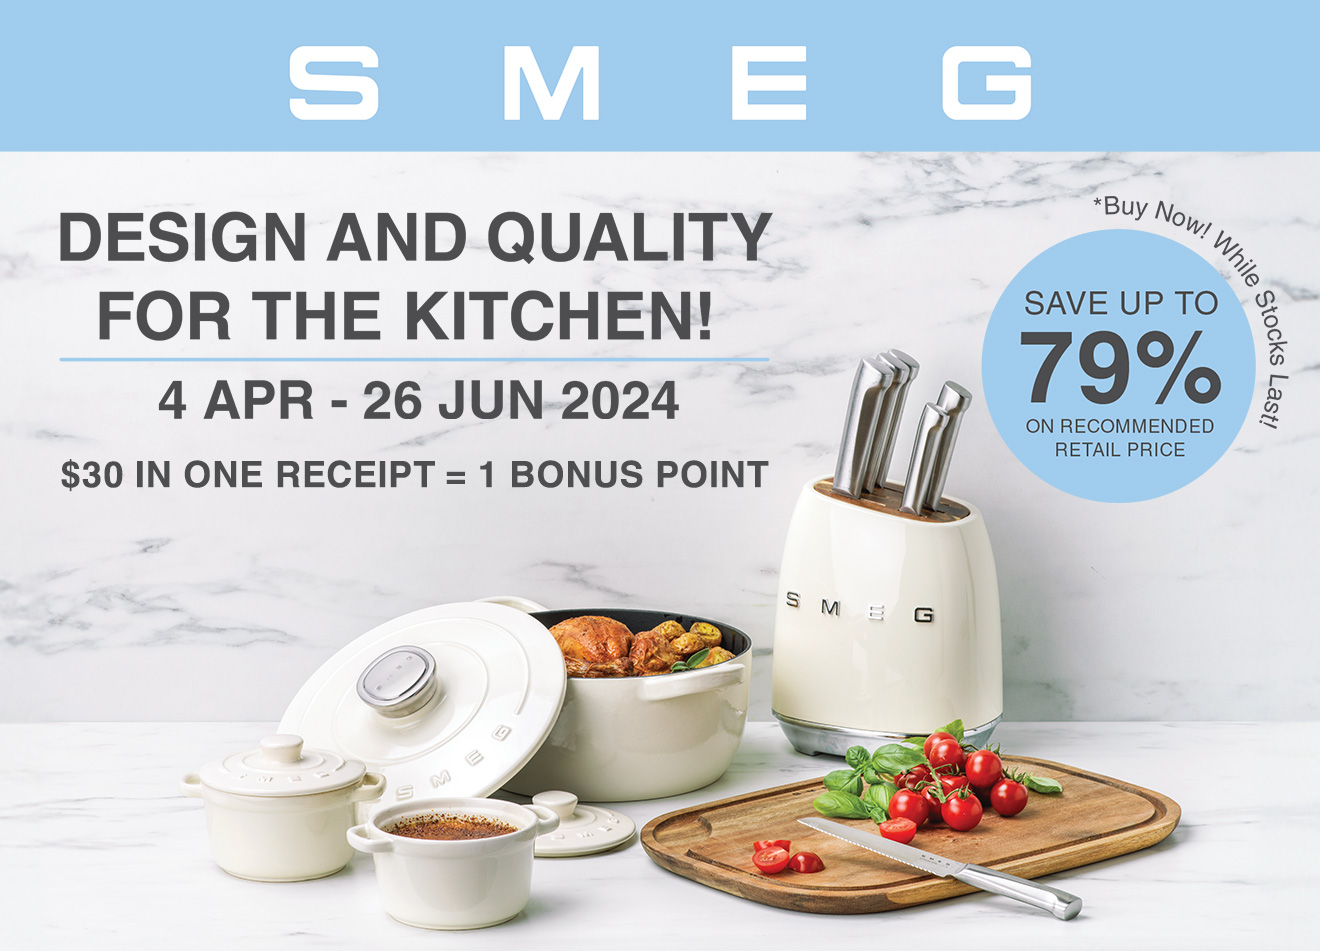 FairPrice Loyalty Programme with SMEG. Save up to 79%! From 4 Apr to 26 Jun 2024.